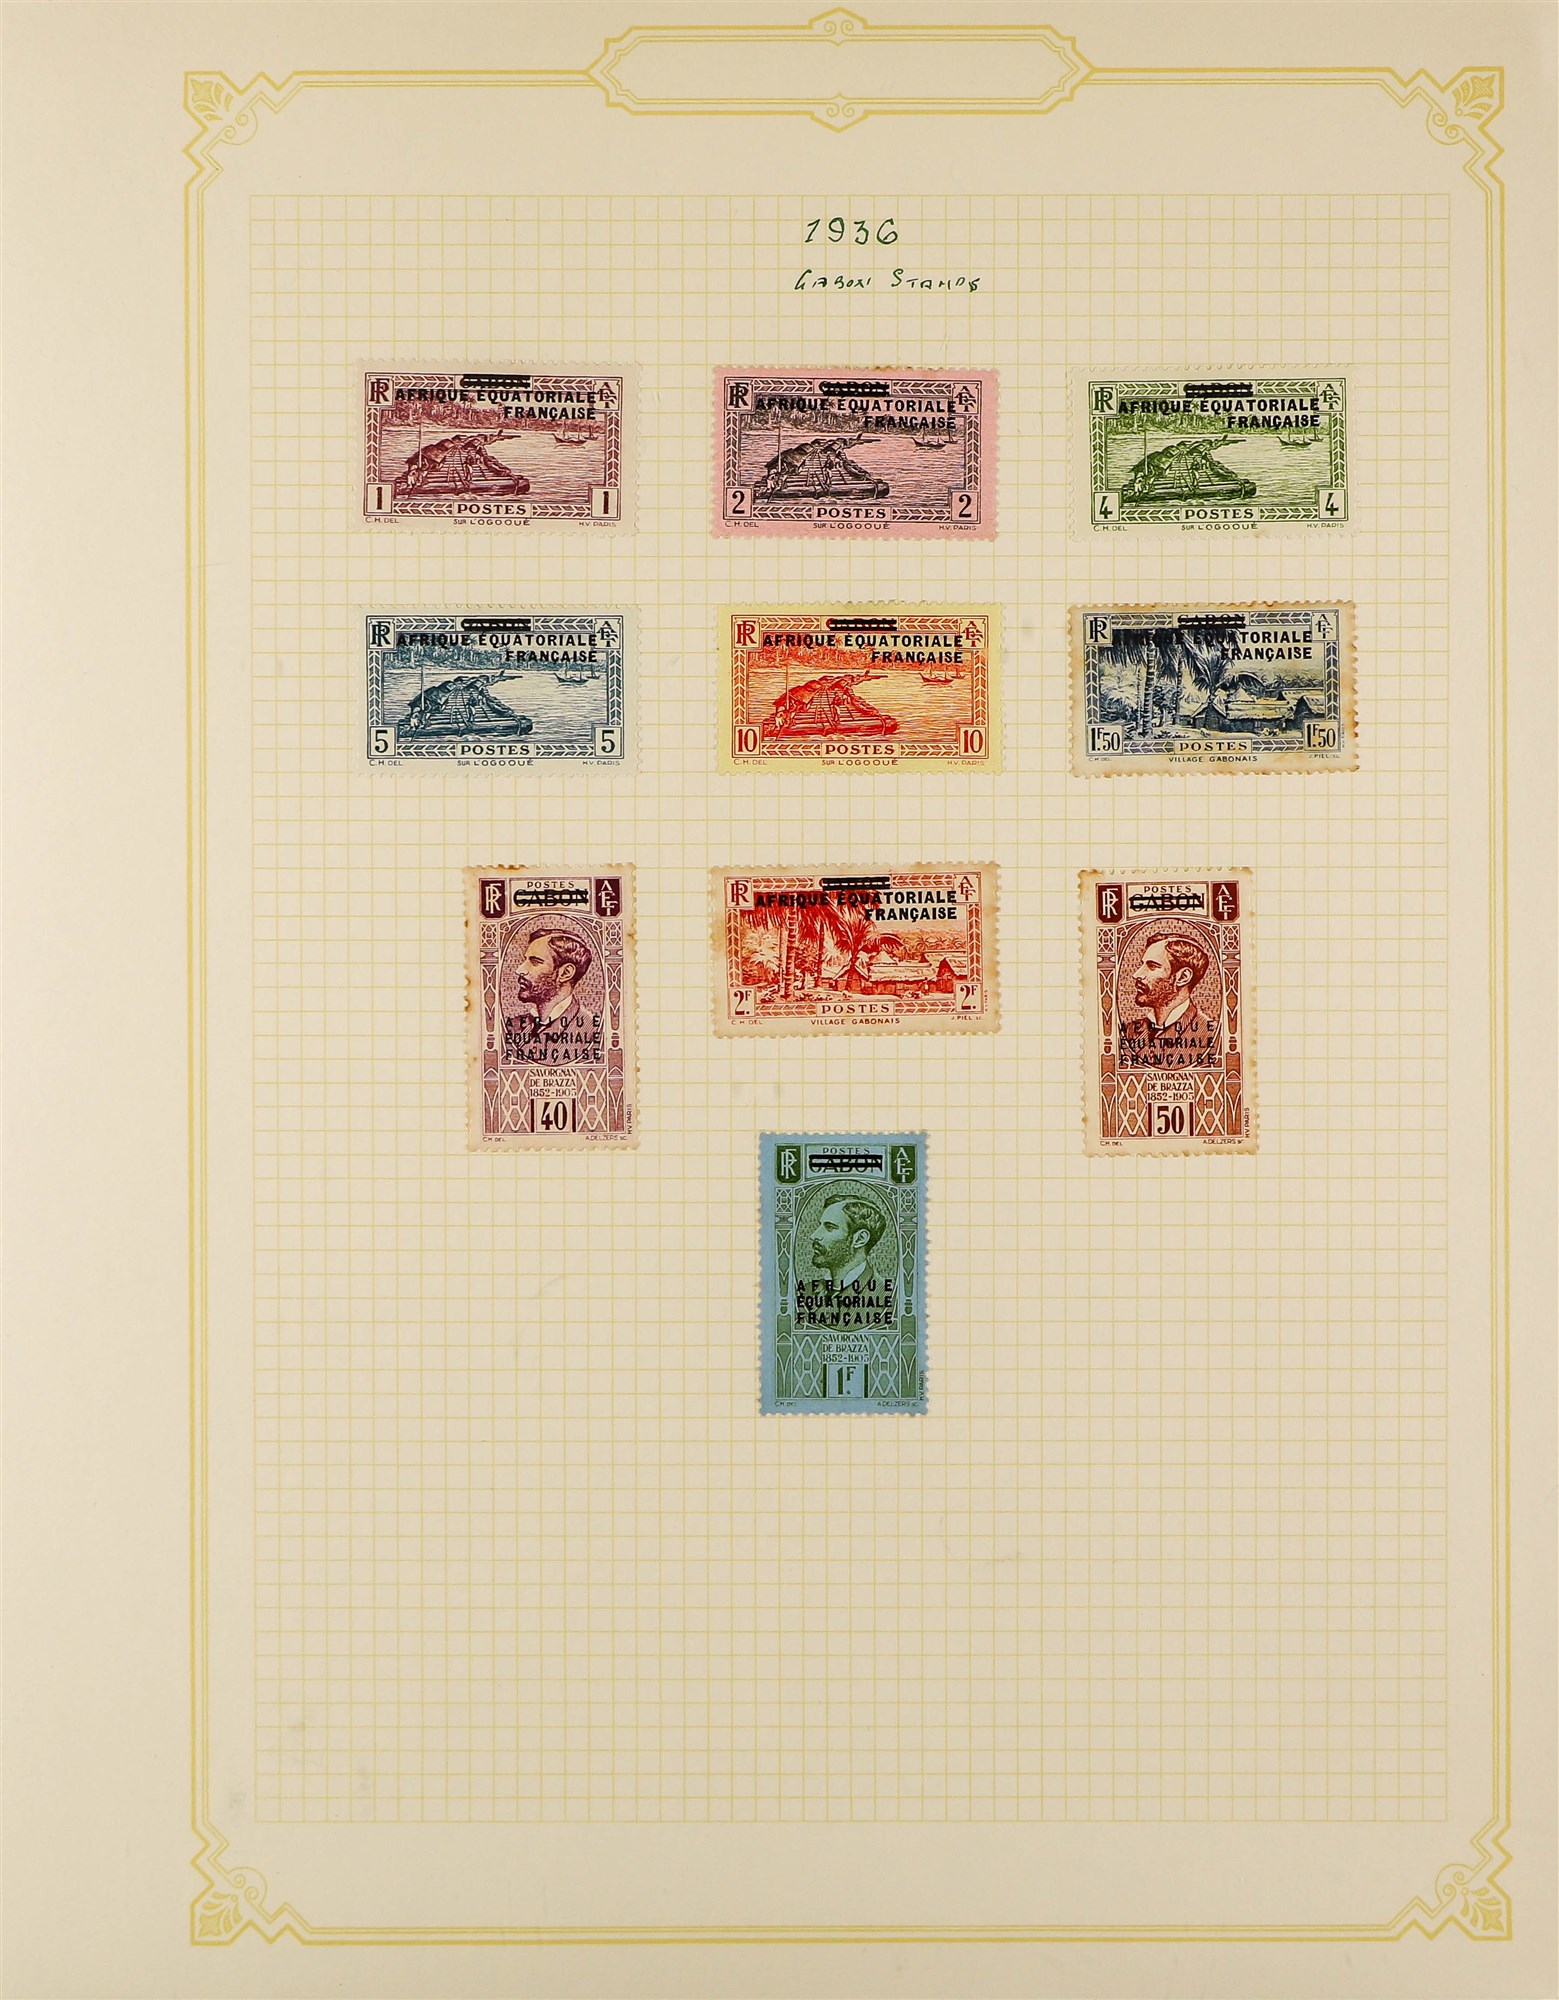 FRENCH COLONIES EQUATORIAL AFRICA 1936 - 1957 comprehensive collection of mint stamps on album pages - Image 2 of 16